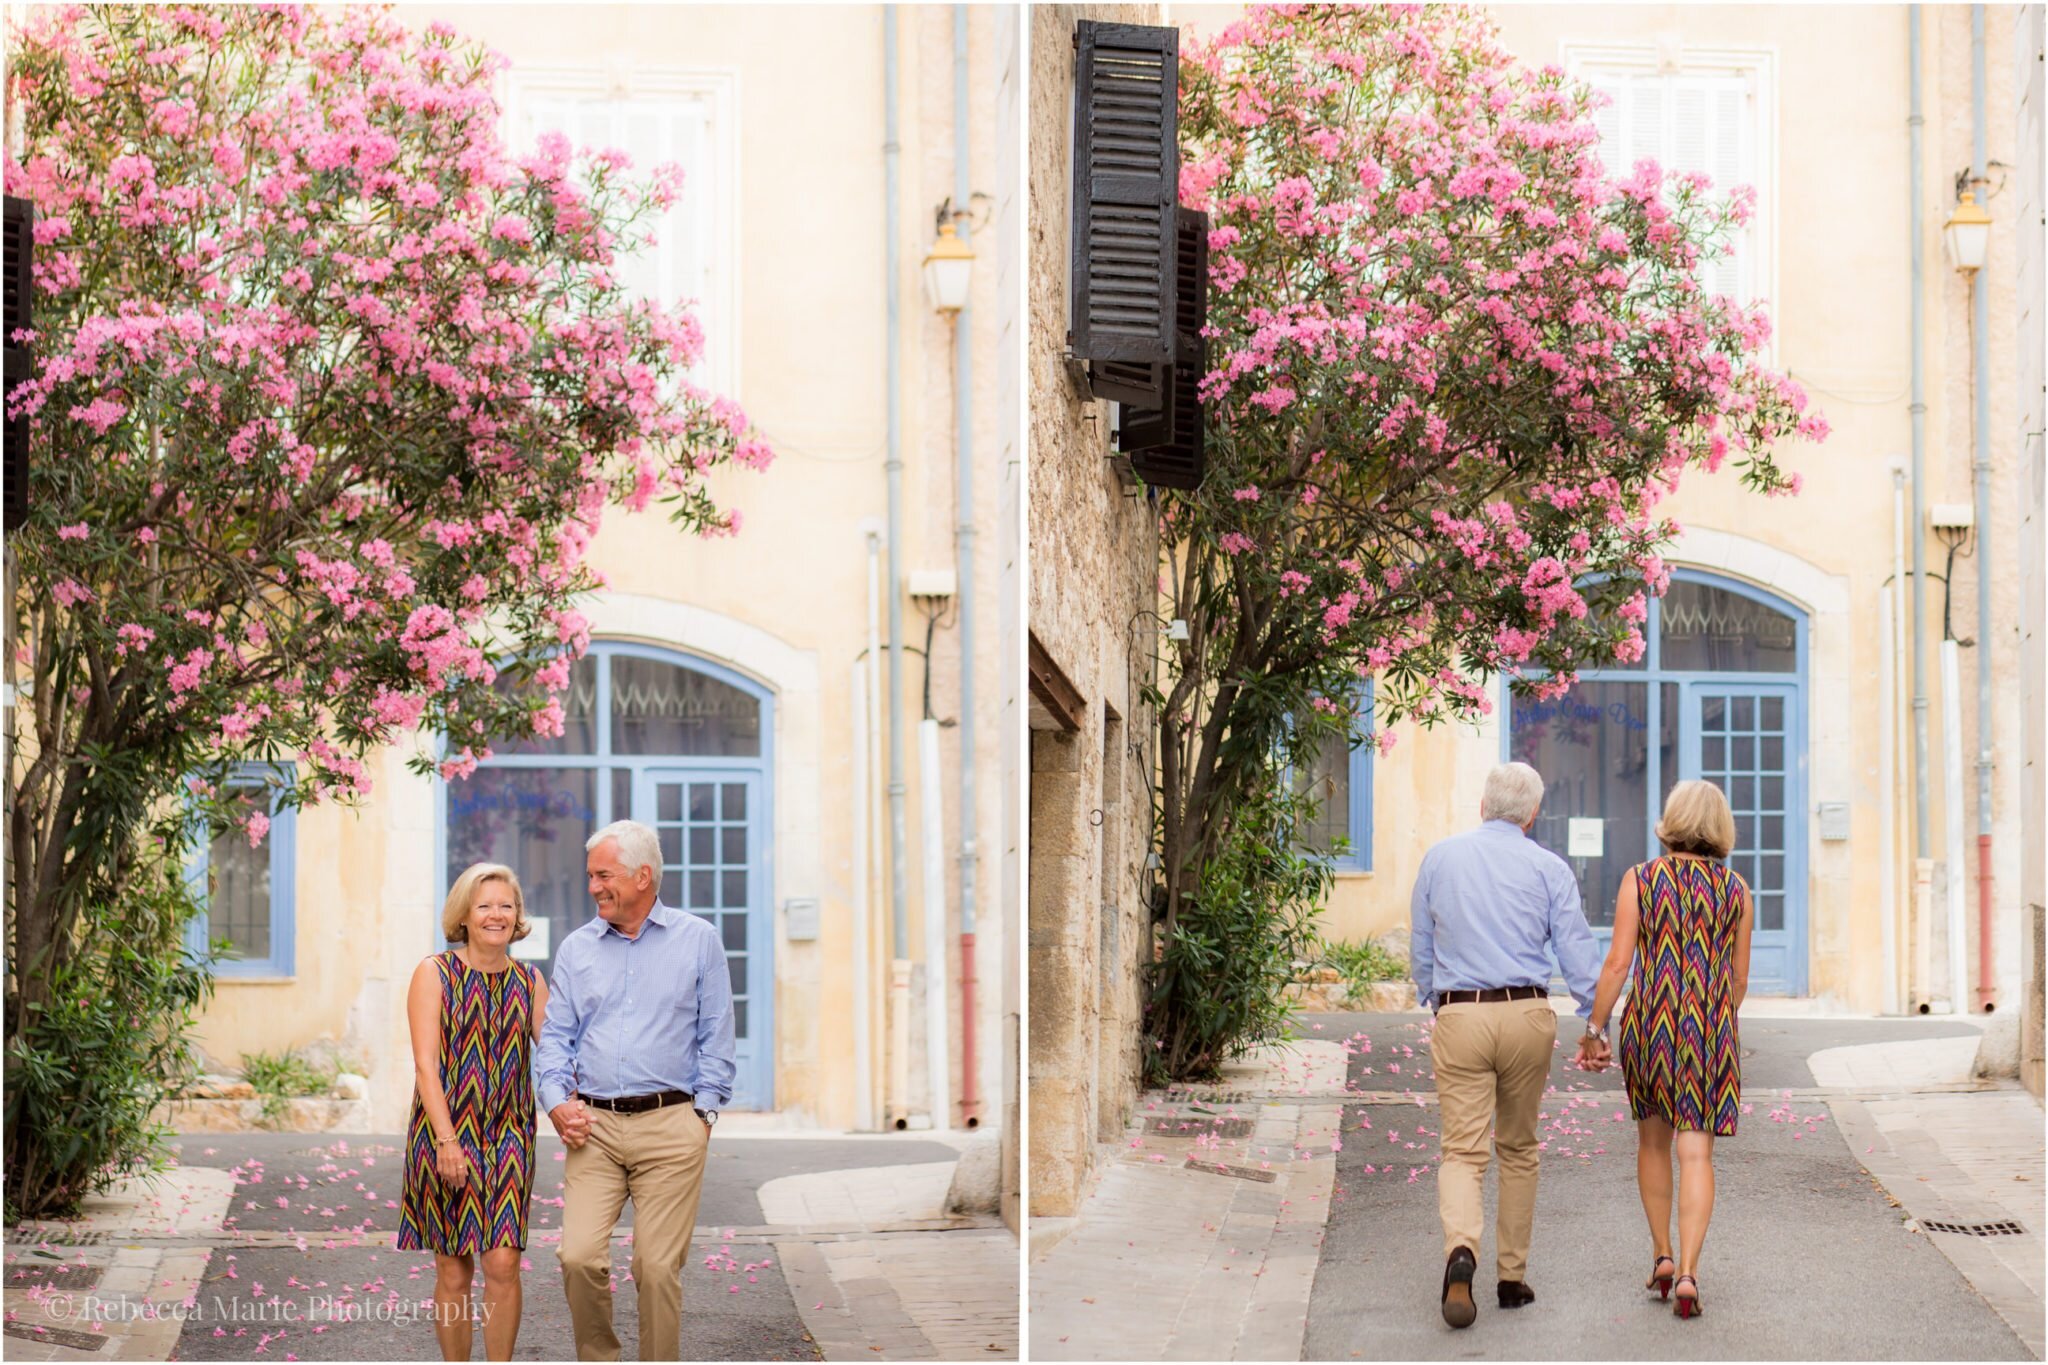 Portraits-in-France-Valbonne-Rebecca-Marie-Photography-18-1-1